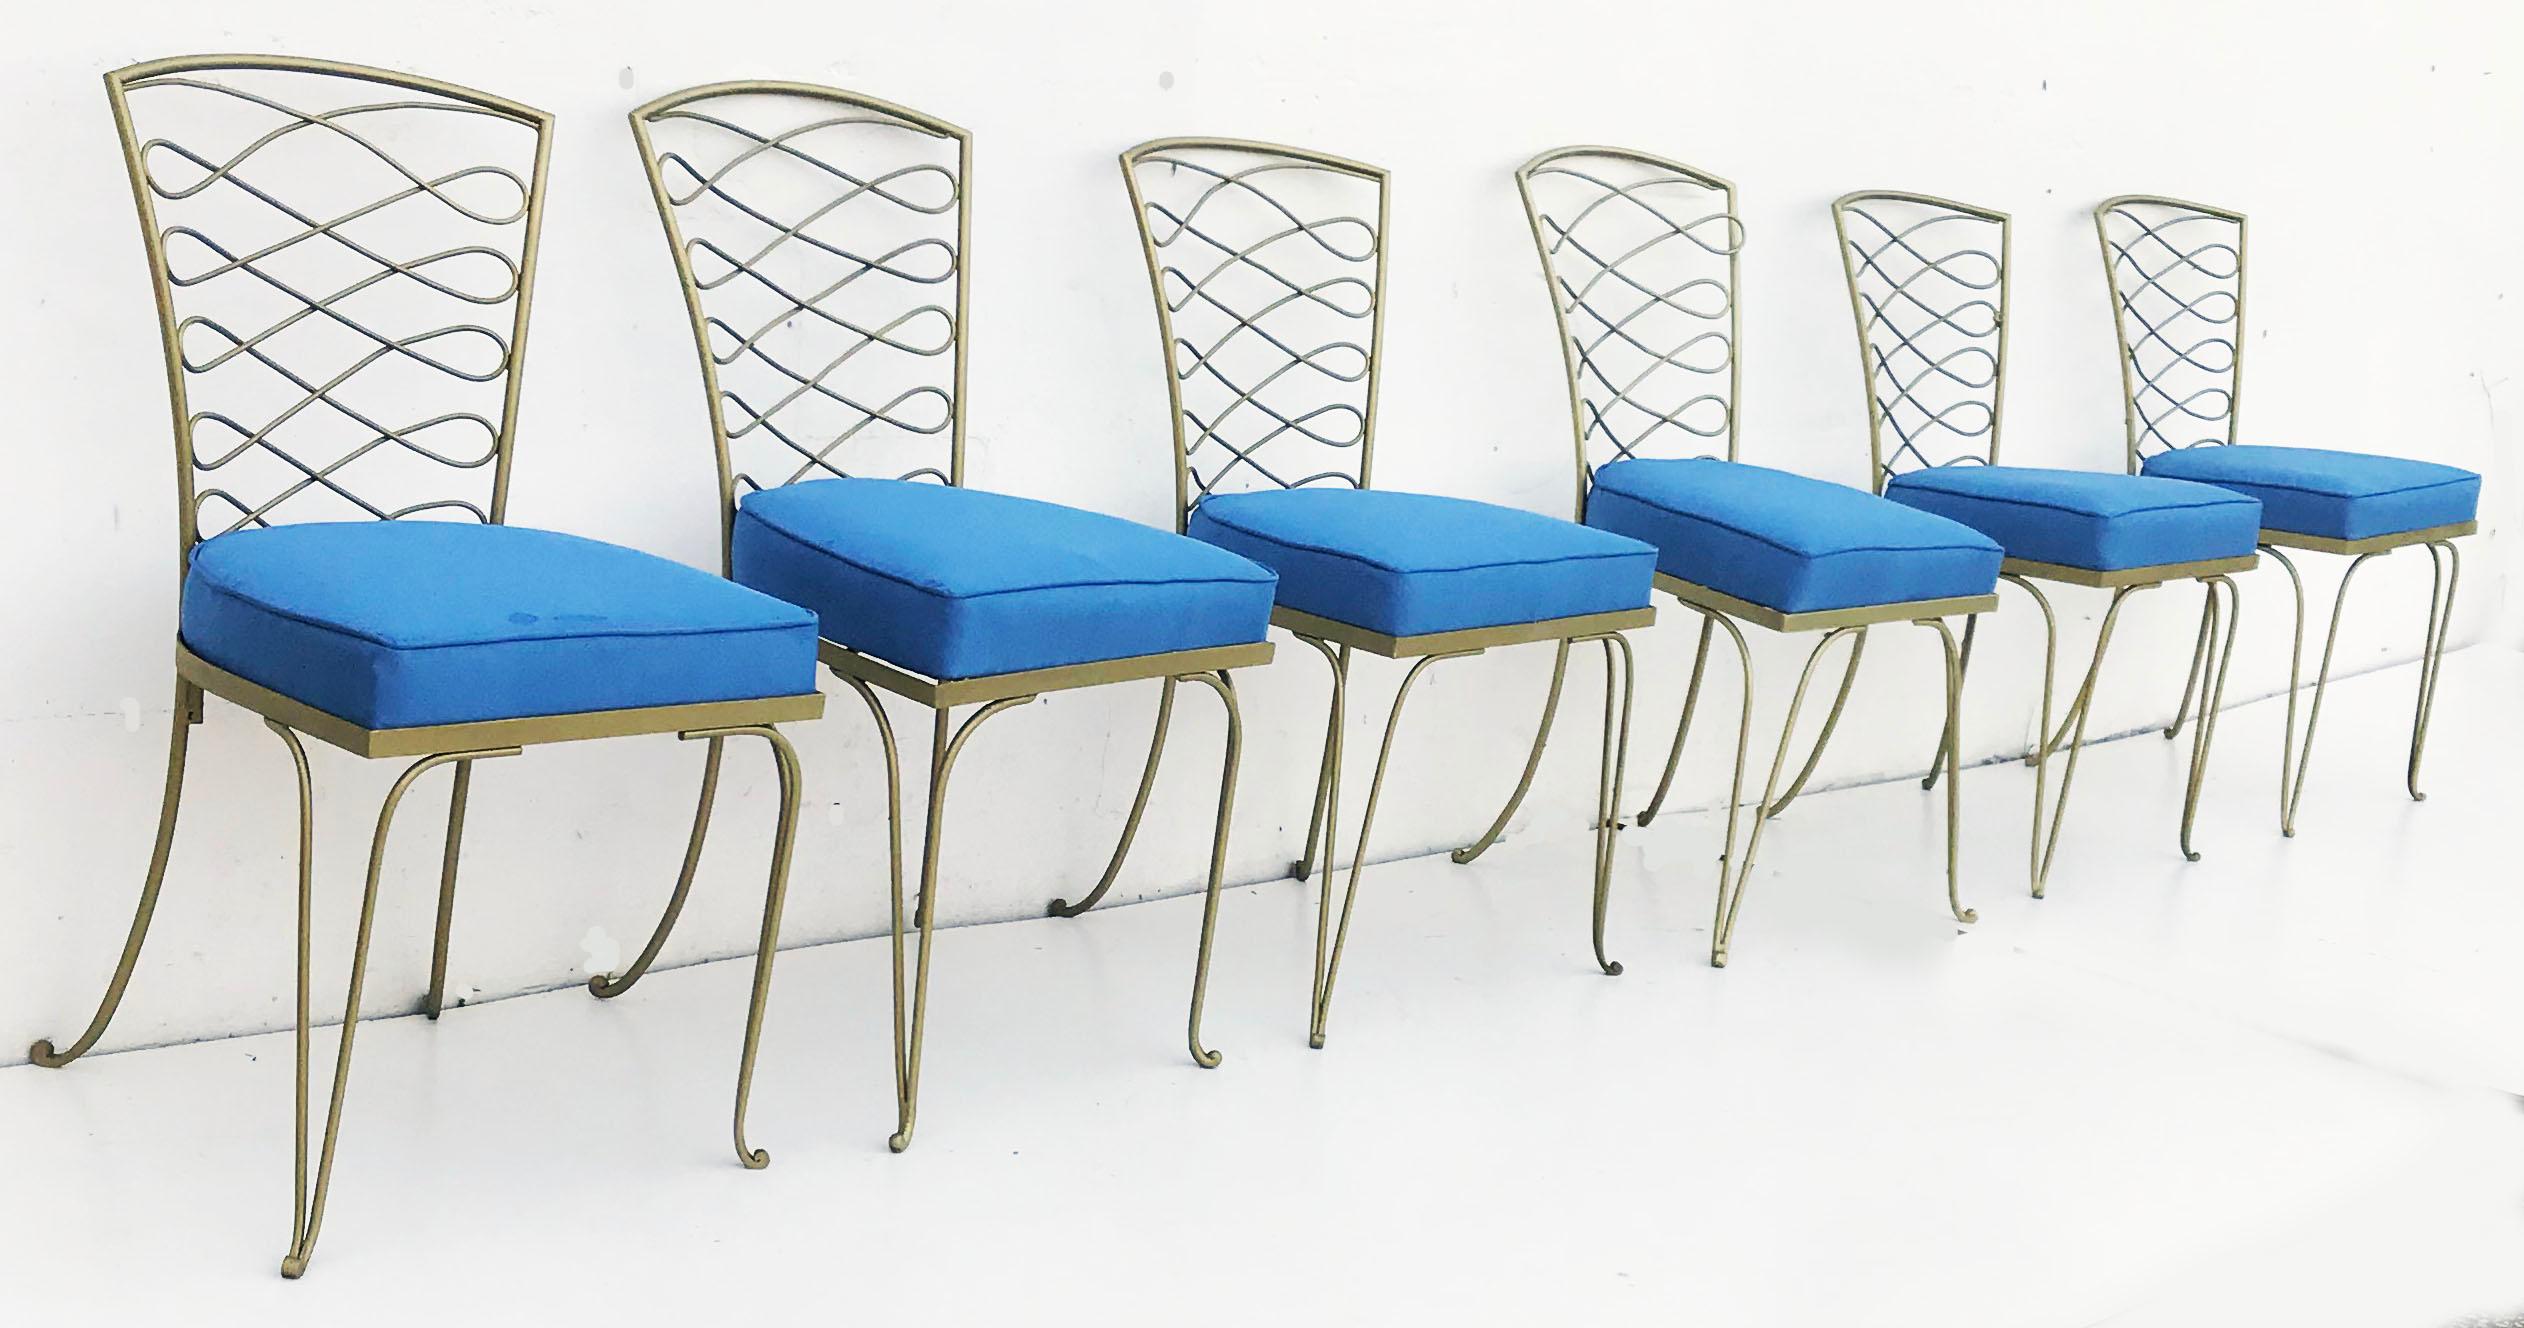 Superb set of Six Art Deco Wrought Iron Dining Chairs by Rene Prou in the 1940s Style.
Seat is covered in a Royal Blue Fabric.
Measures: Seat Height: 17 inches.
 